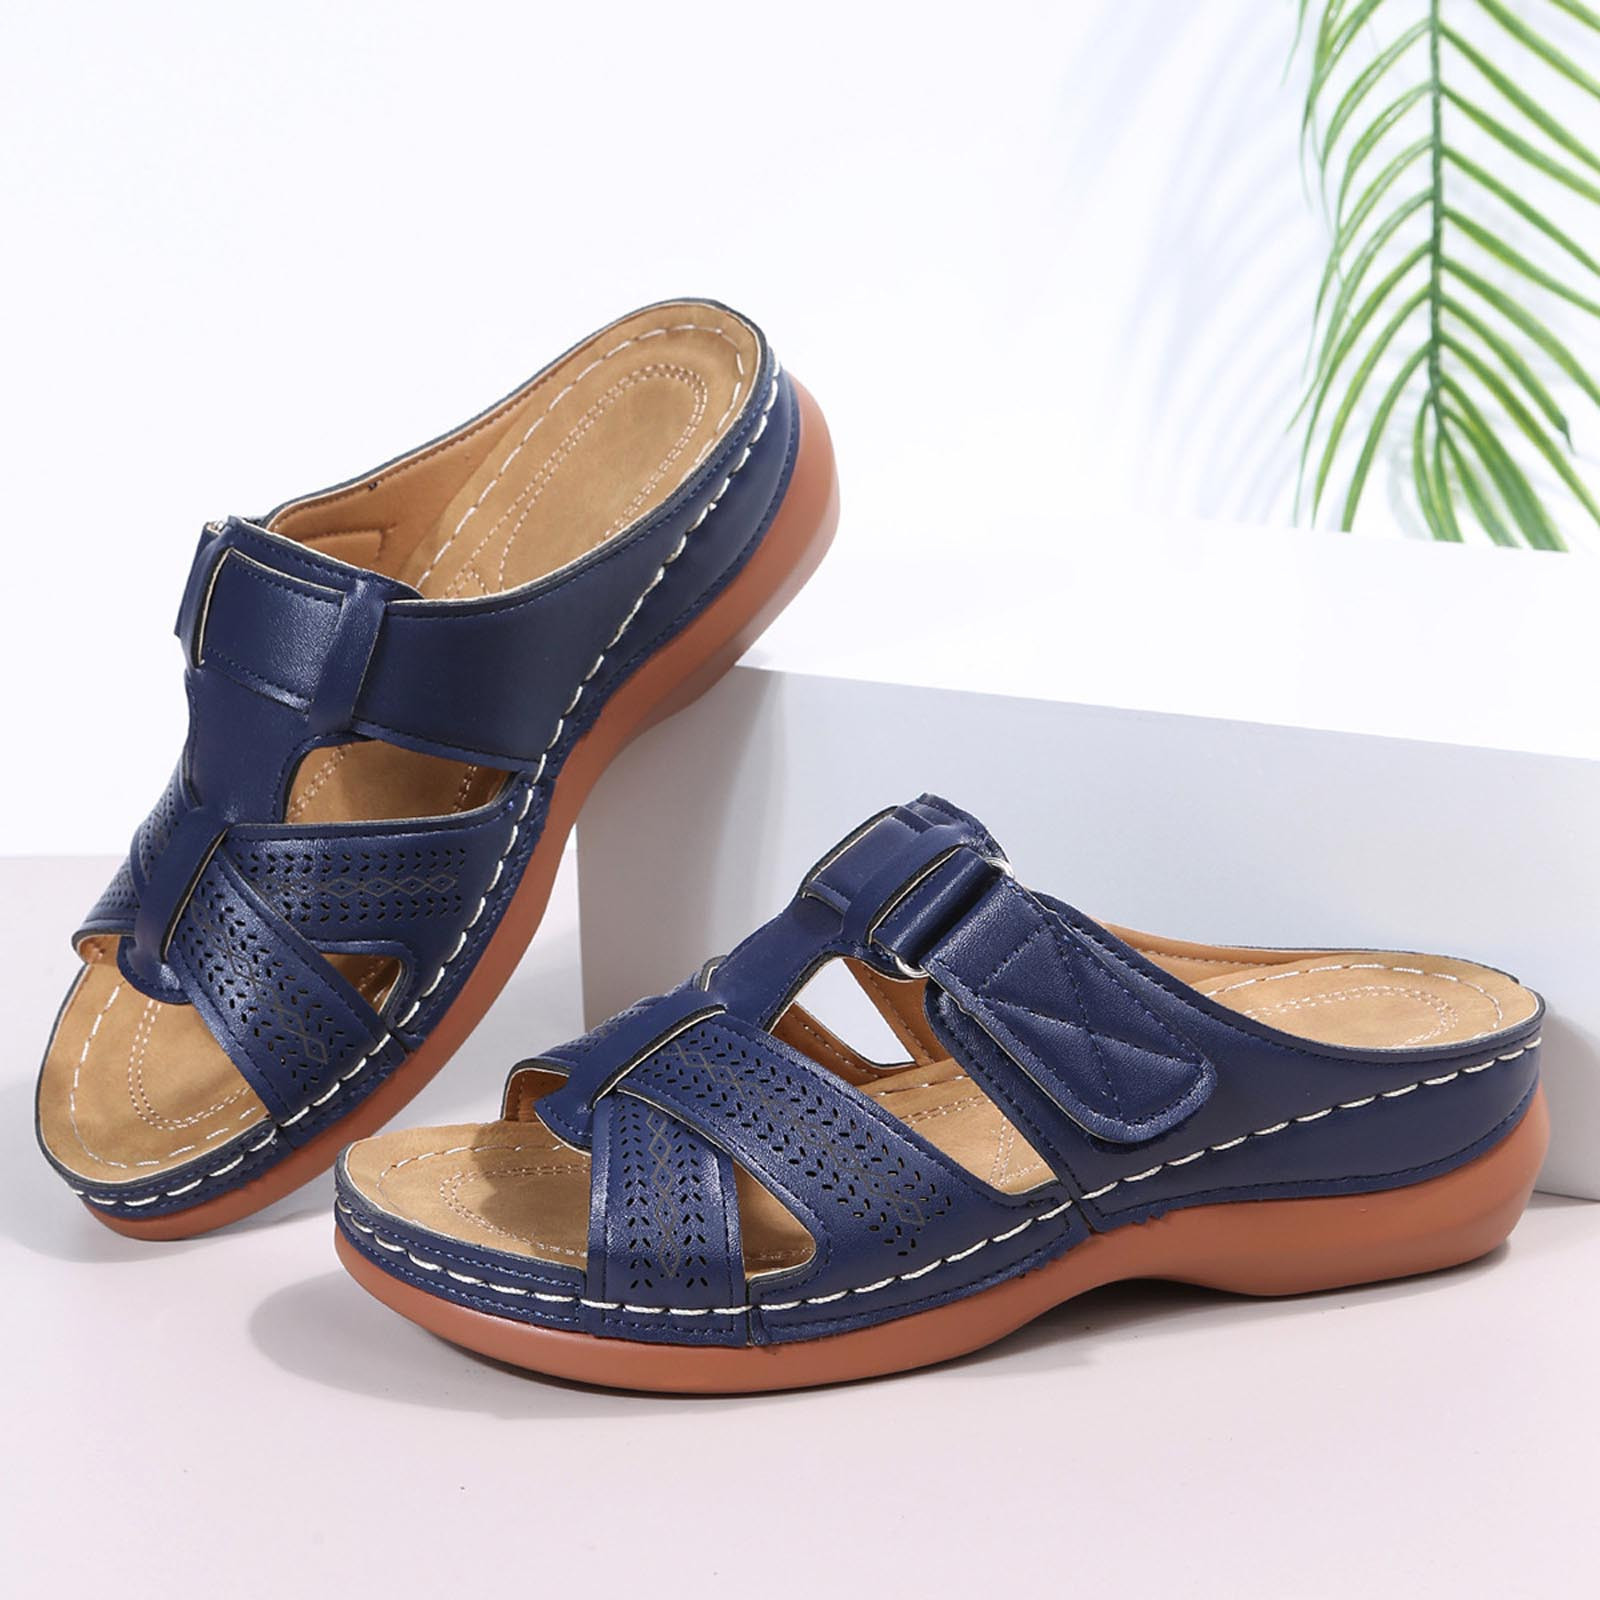 Jsaierl Wedge Sandals for Women Dressy Summer, Flat Arch-support ...